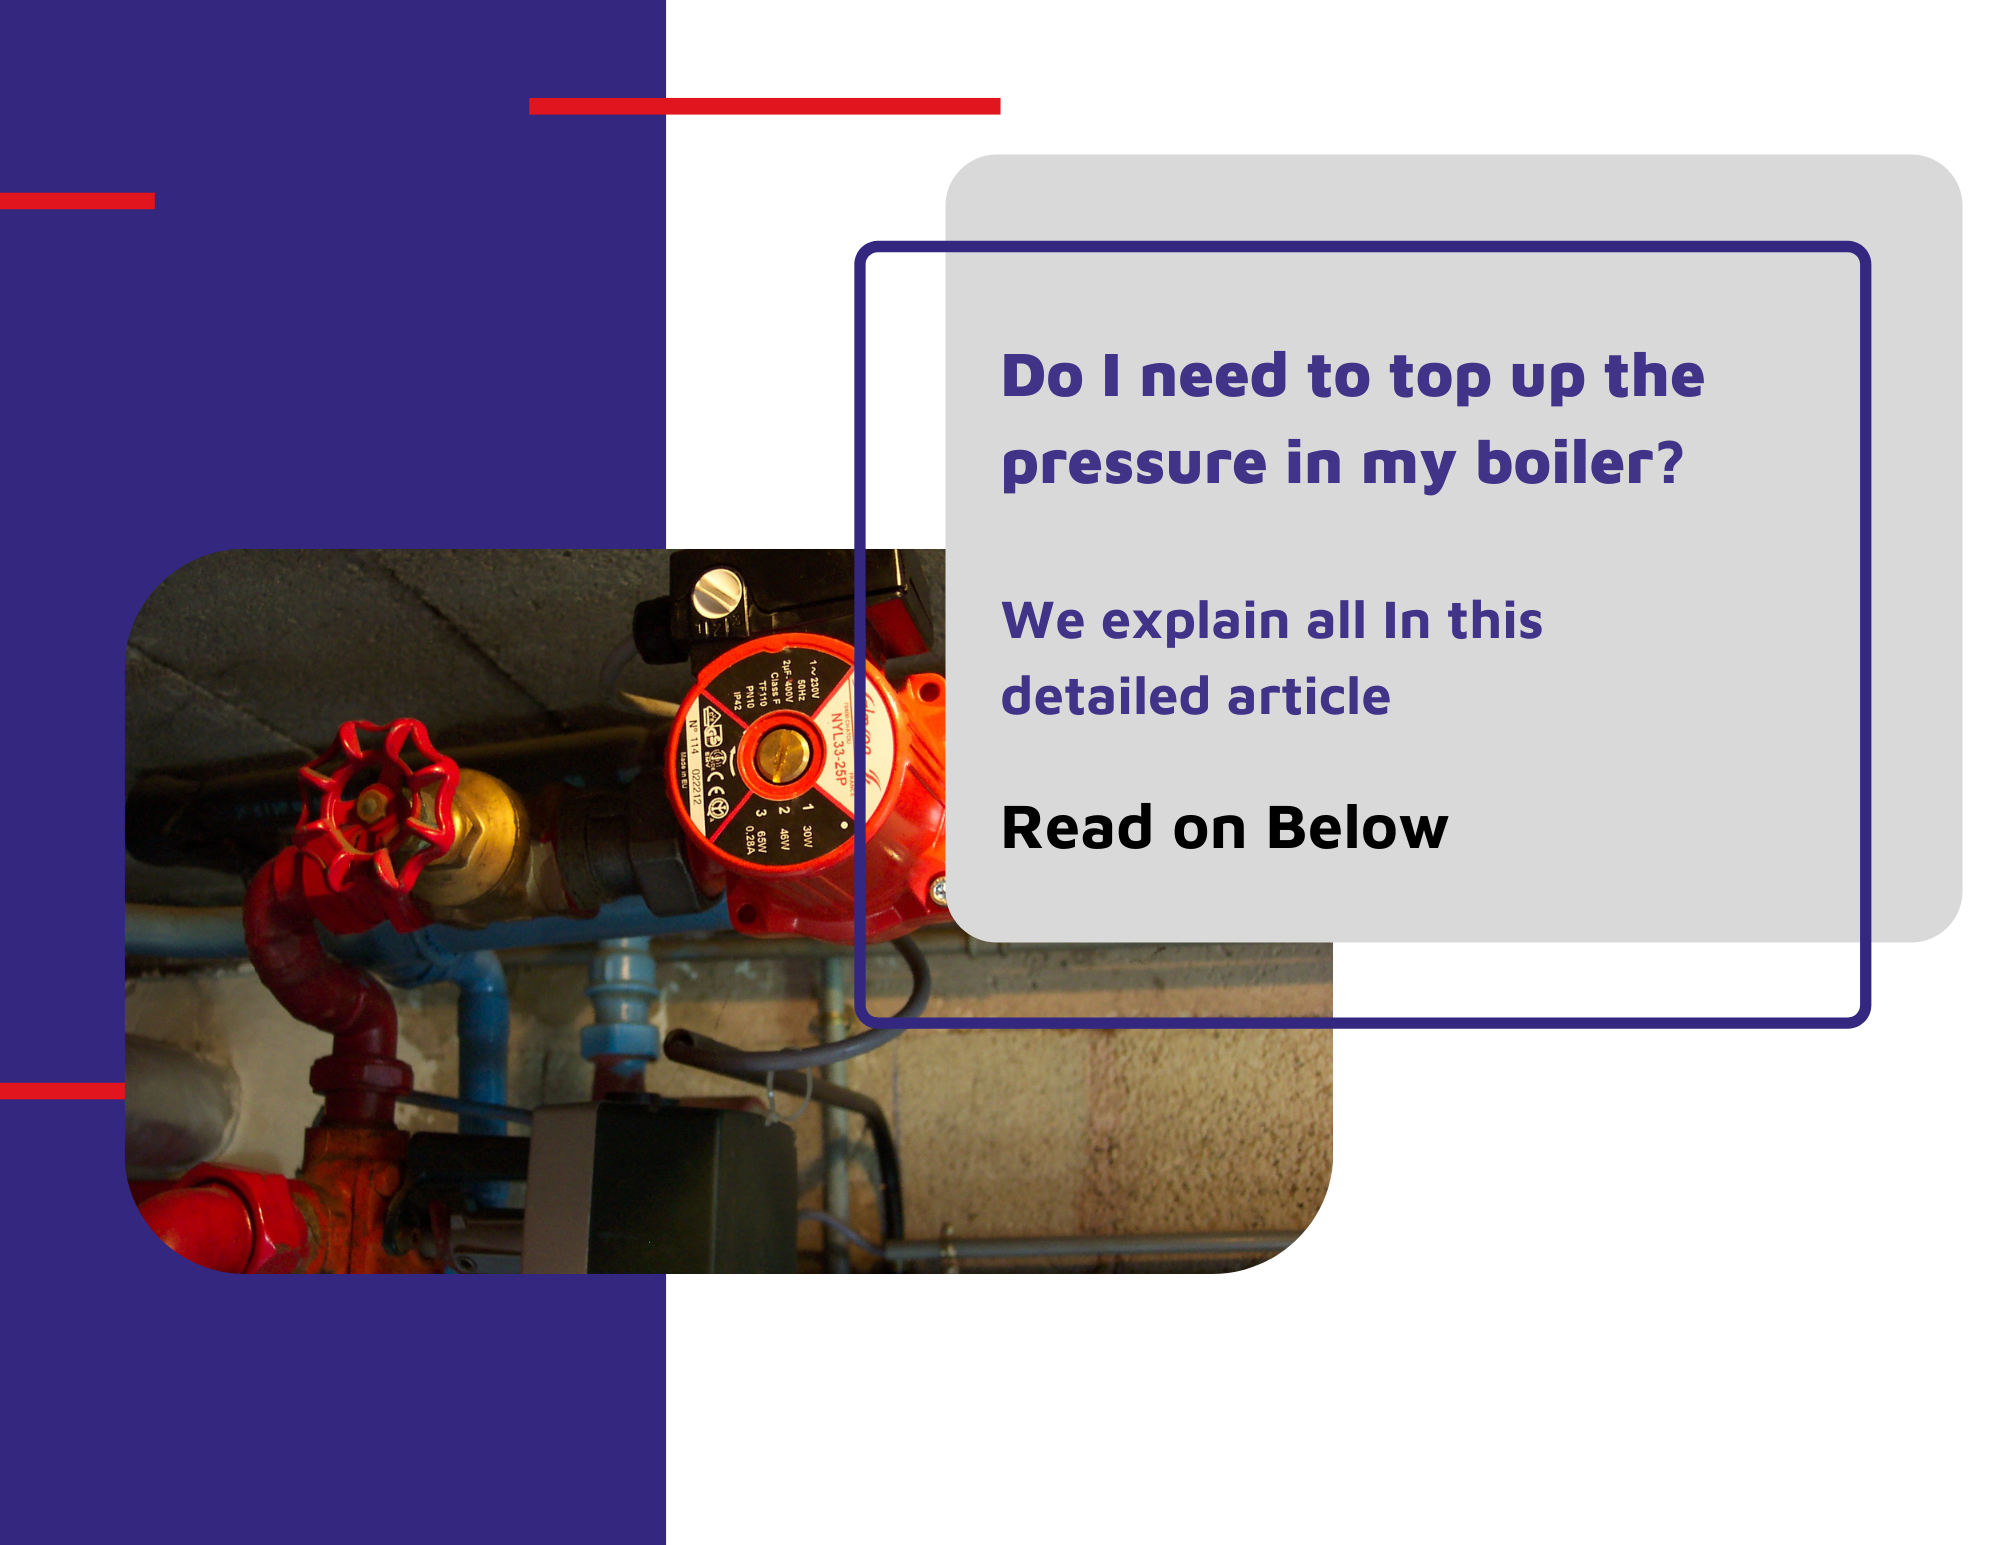 Do I Need to top up the pressure in my boiler cover